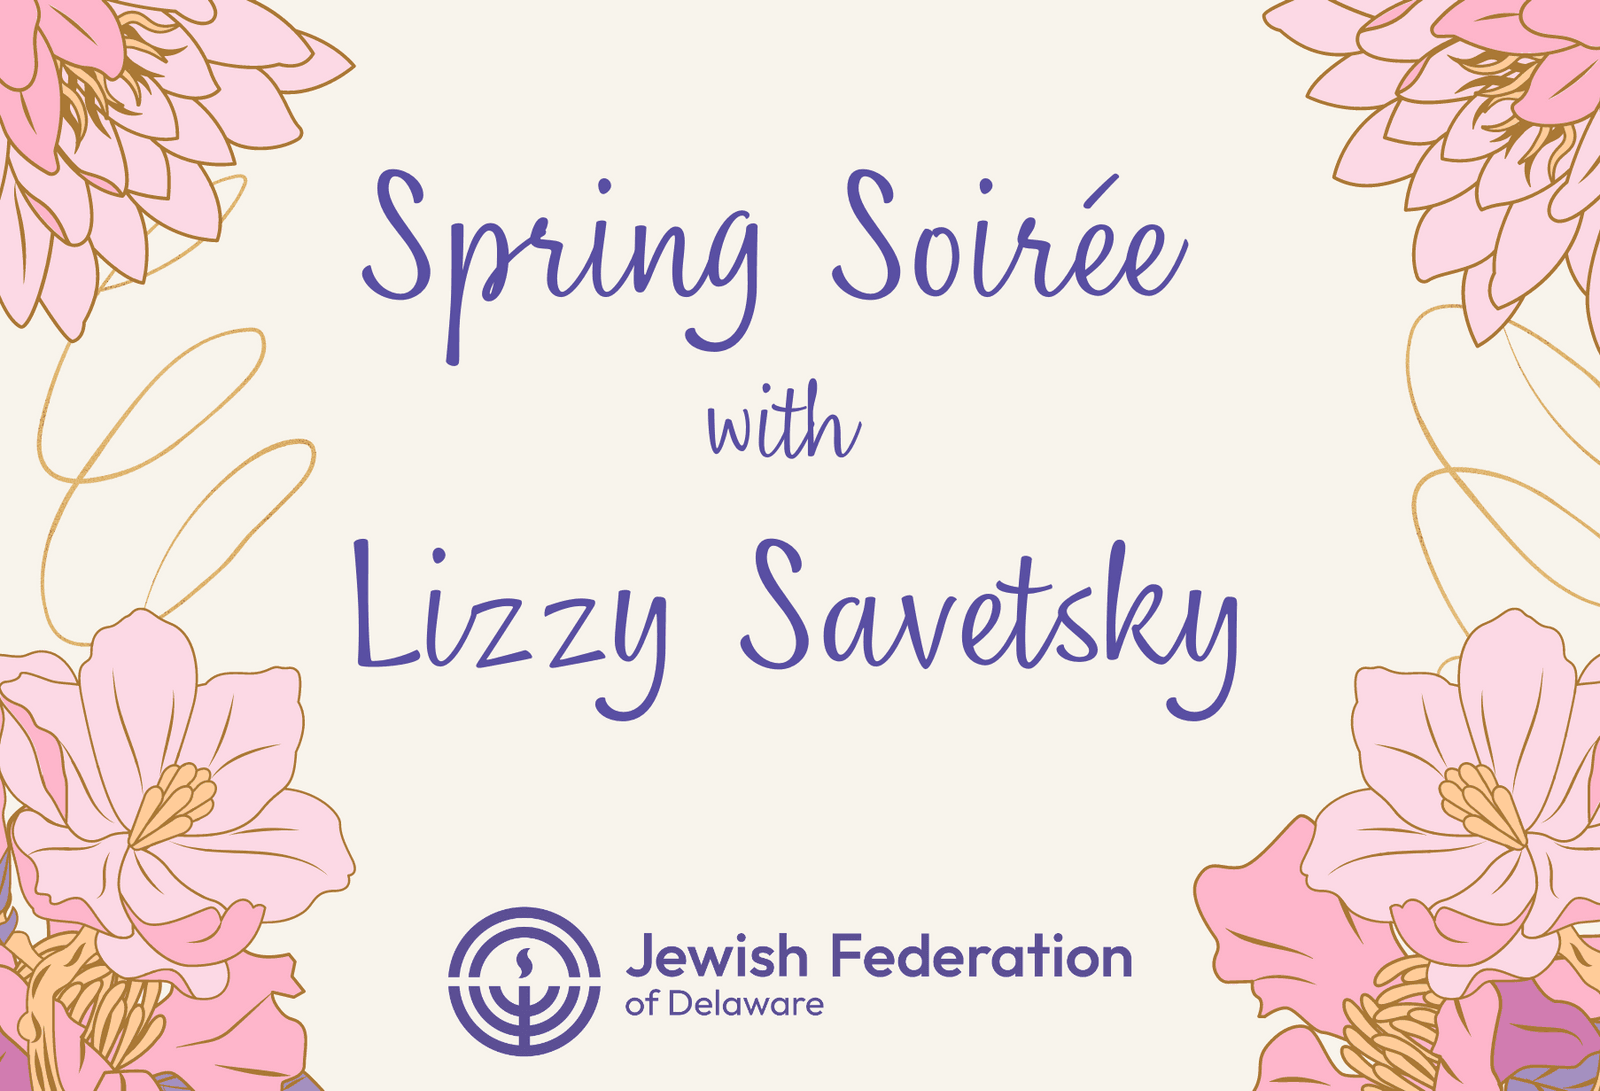 Spring Soiree with Lizzy Savetsky